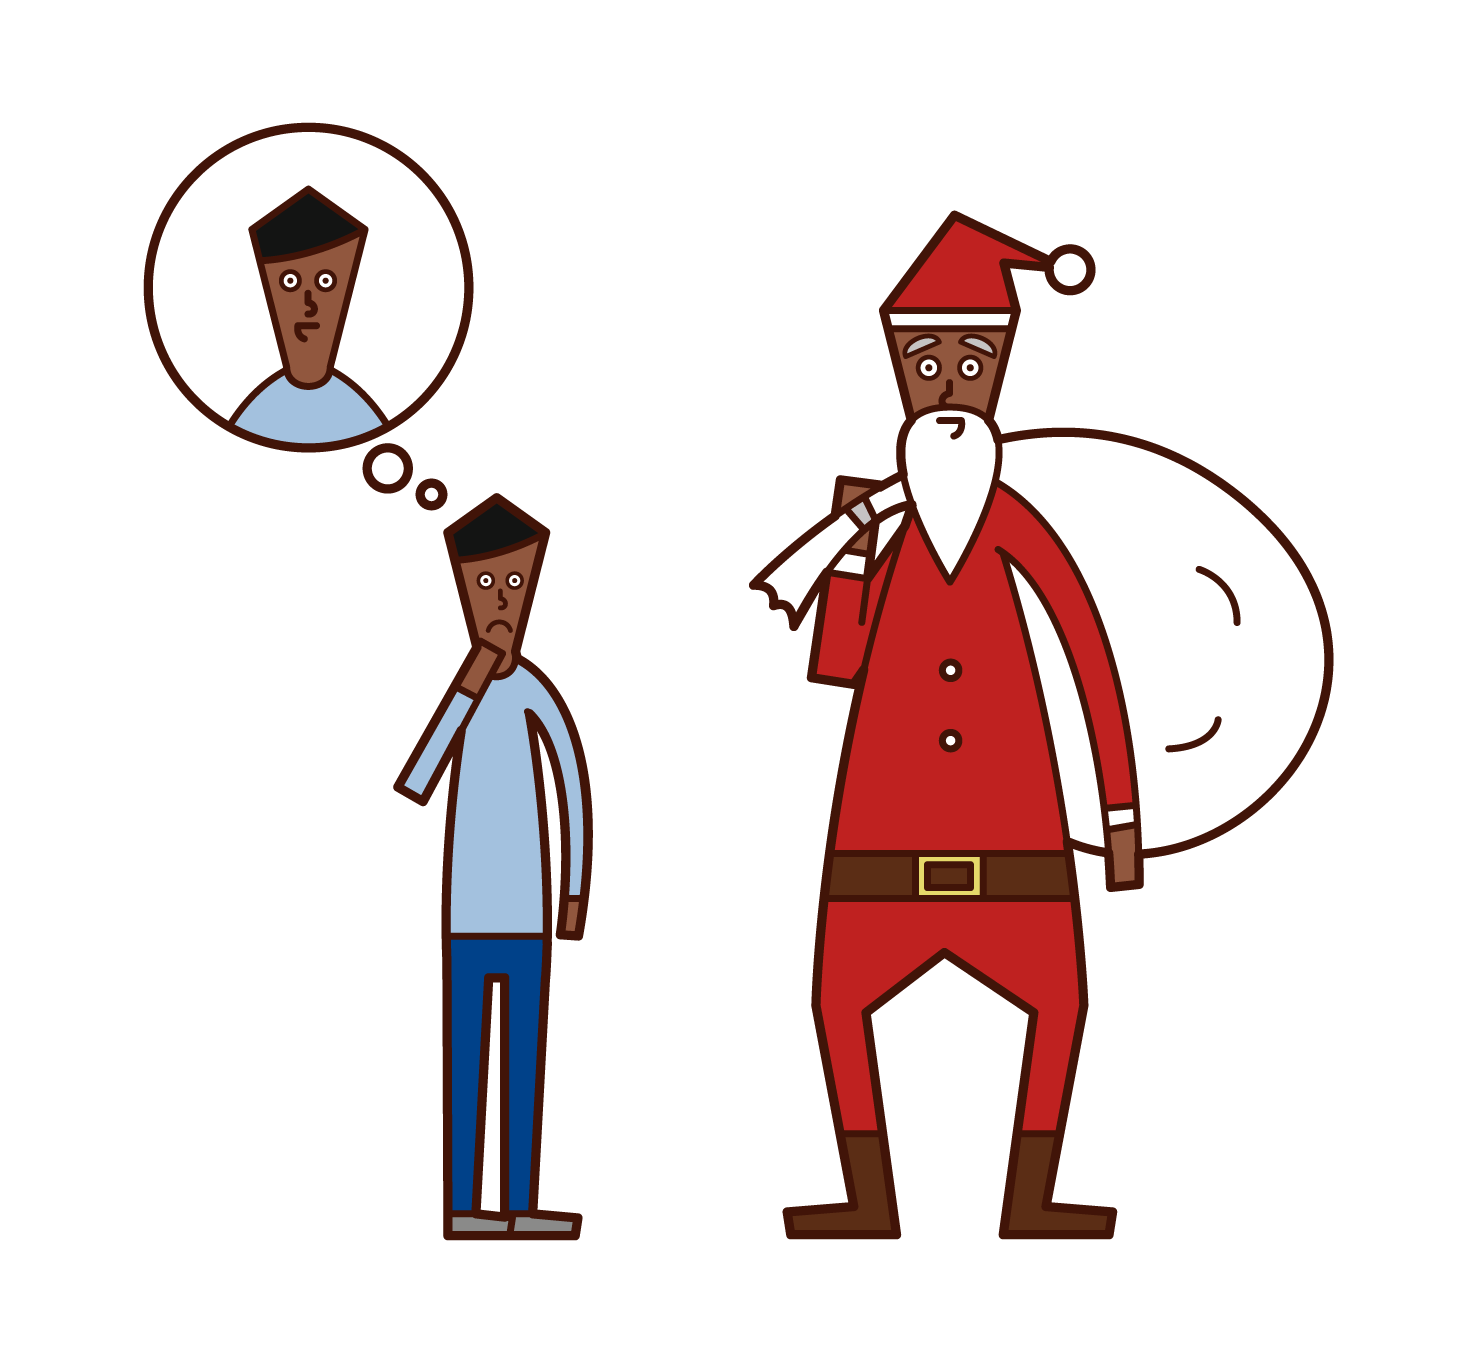 Illustration of a child (boy) who doubts the identity of Santa Claus